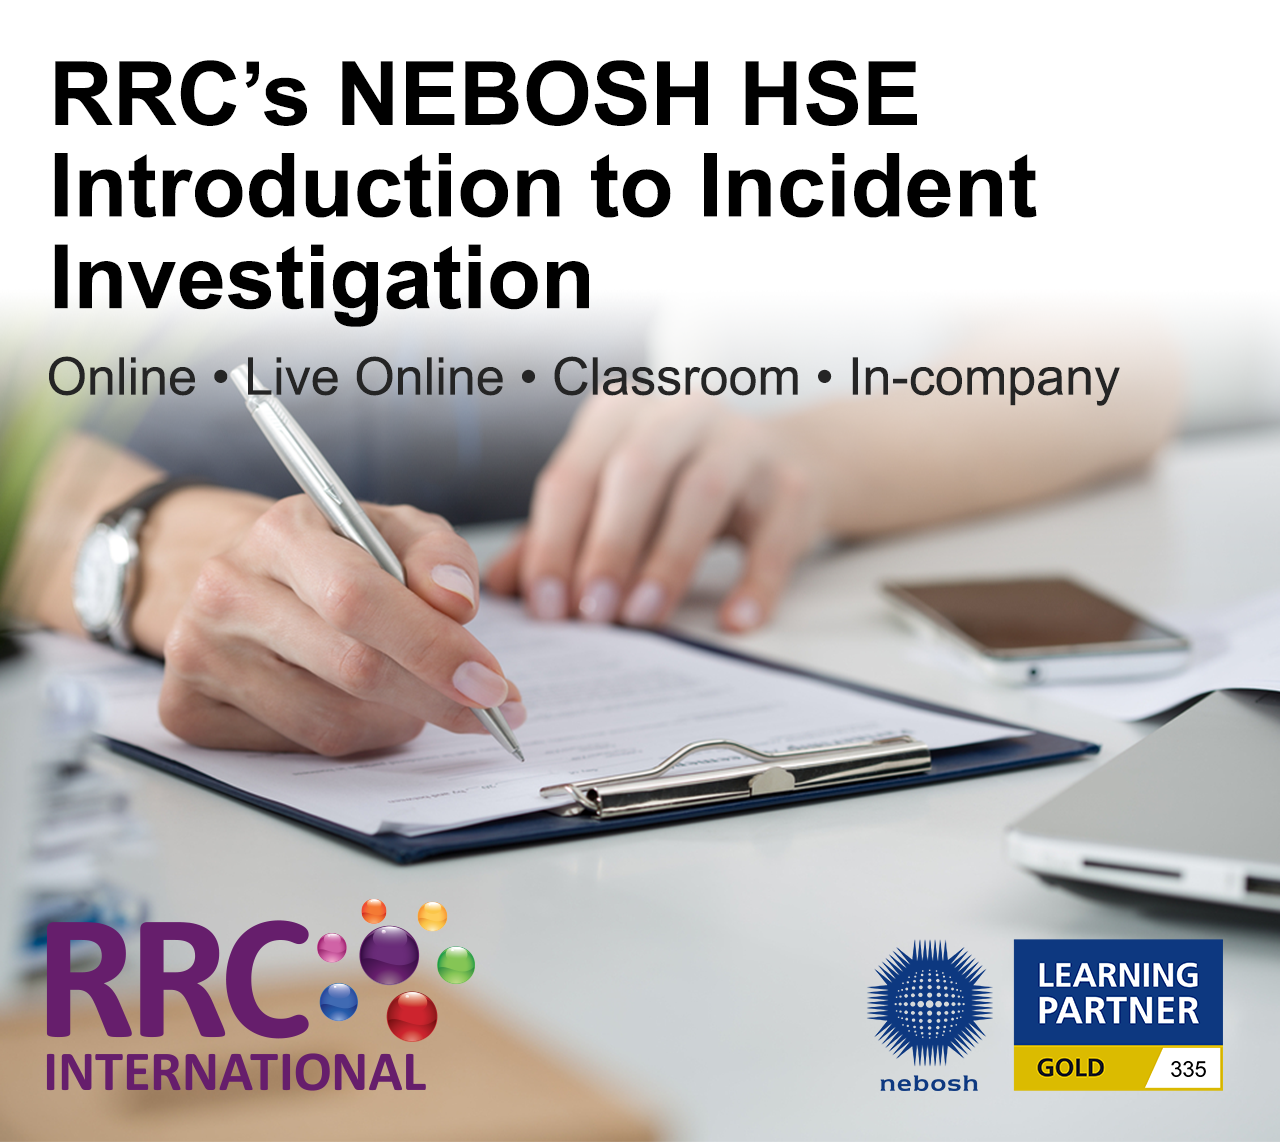 RRC's NEBOSH HSE Introduction to Incident Investigation